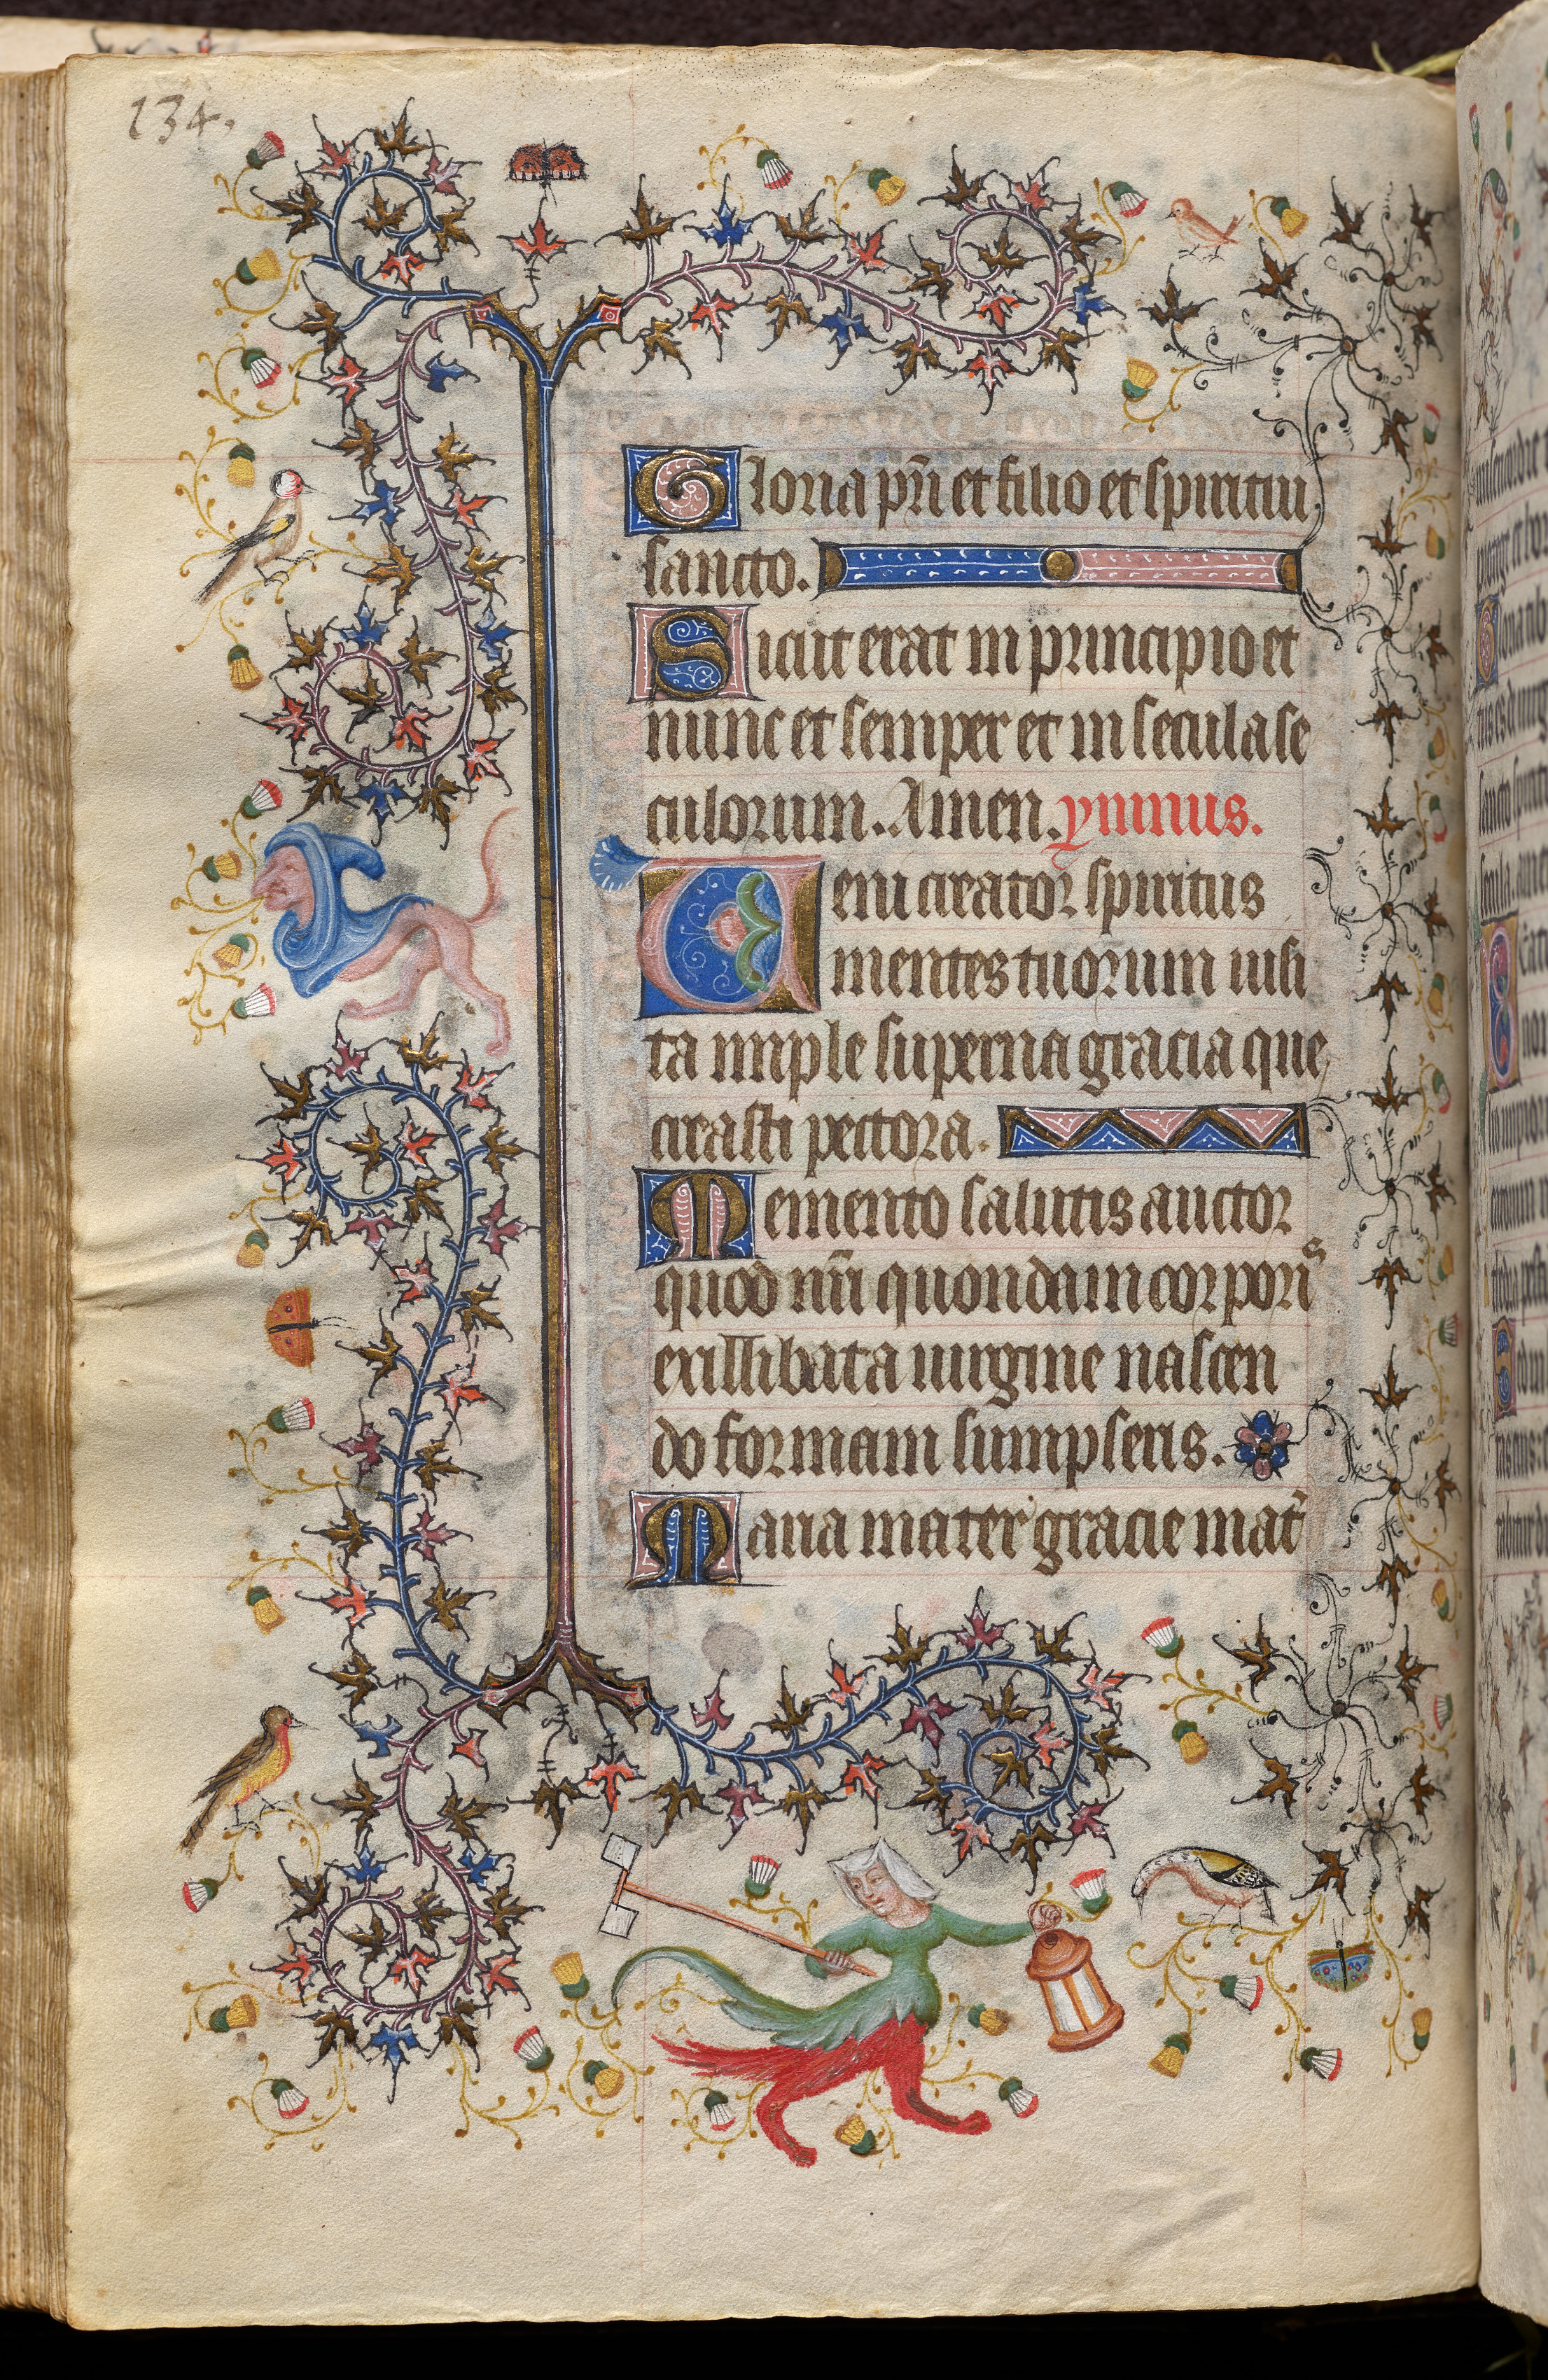 Hours of Charles the Noble, King of Navarre (1361-1425): fol. 67v Text